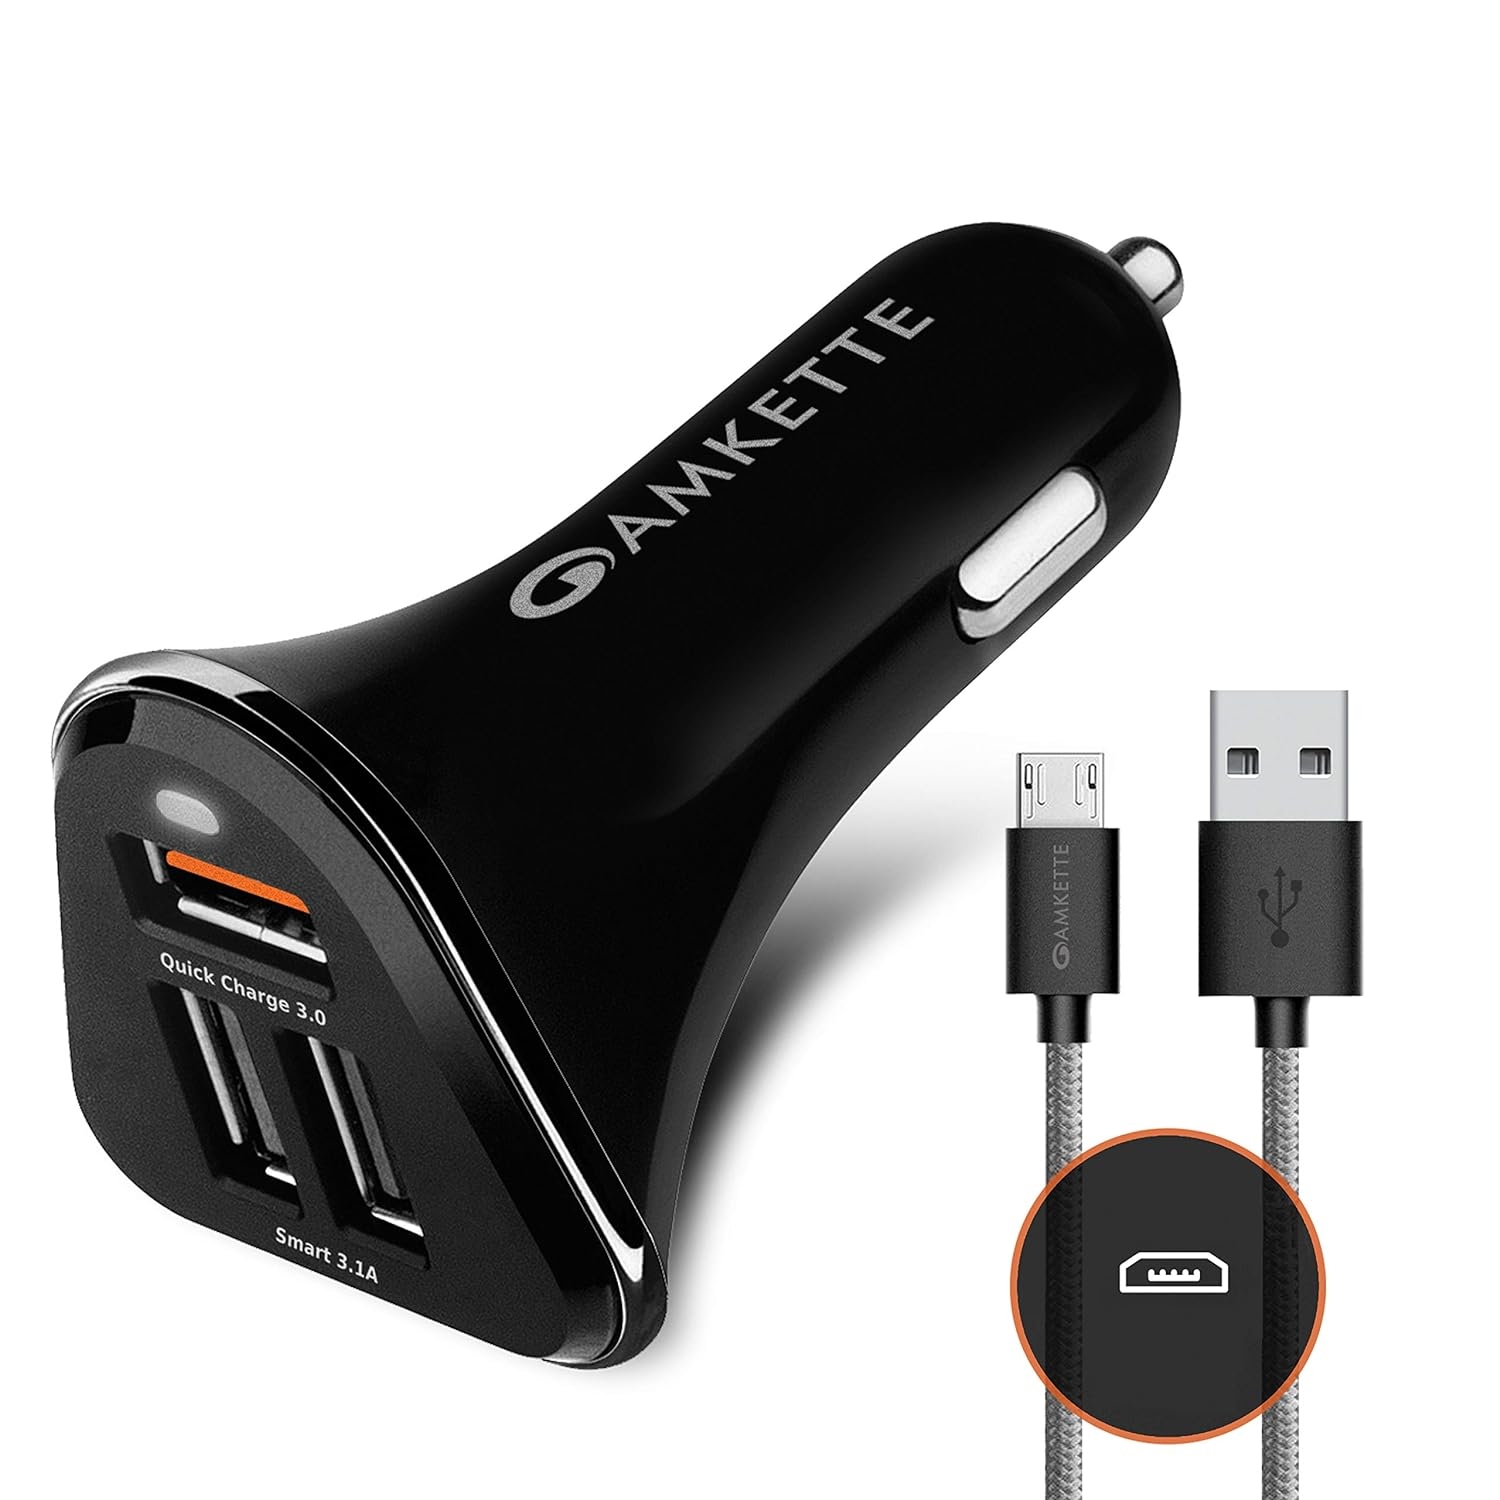 Amkette Power Pro 3 Port 33 Watts USB Car Charger with Quick Charge 3.0 & Free Braided Micro USB Cable, 1 Year Warranty (Black).